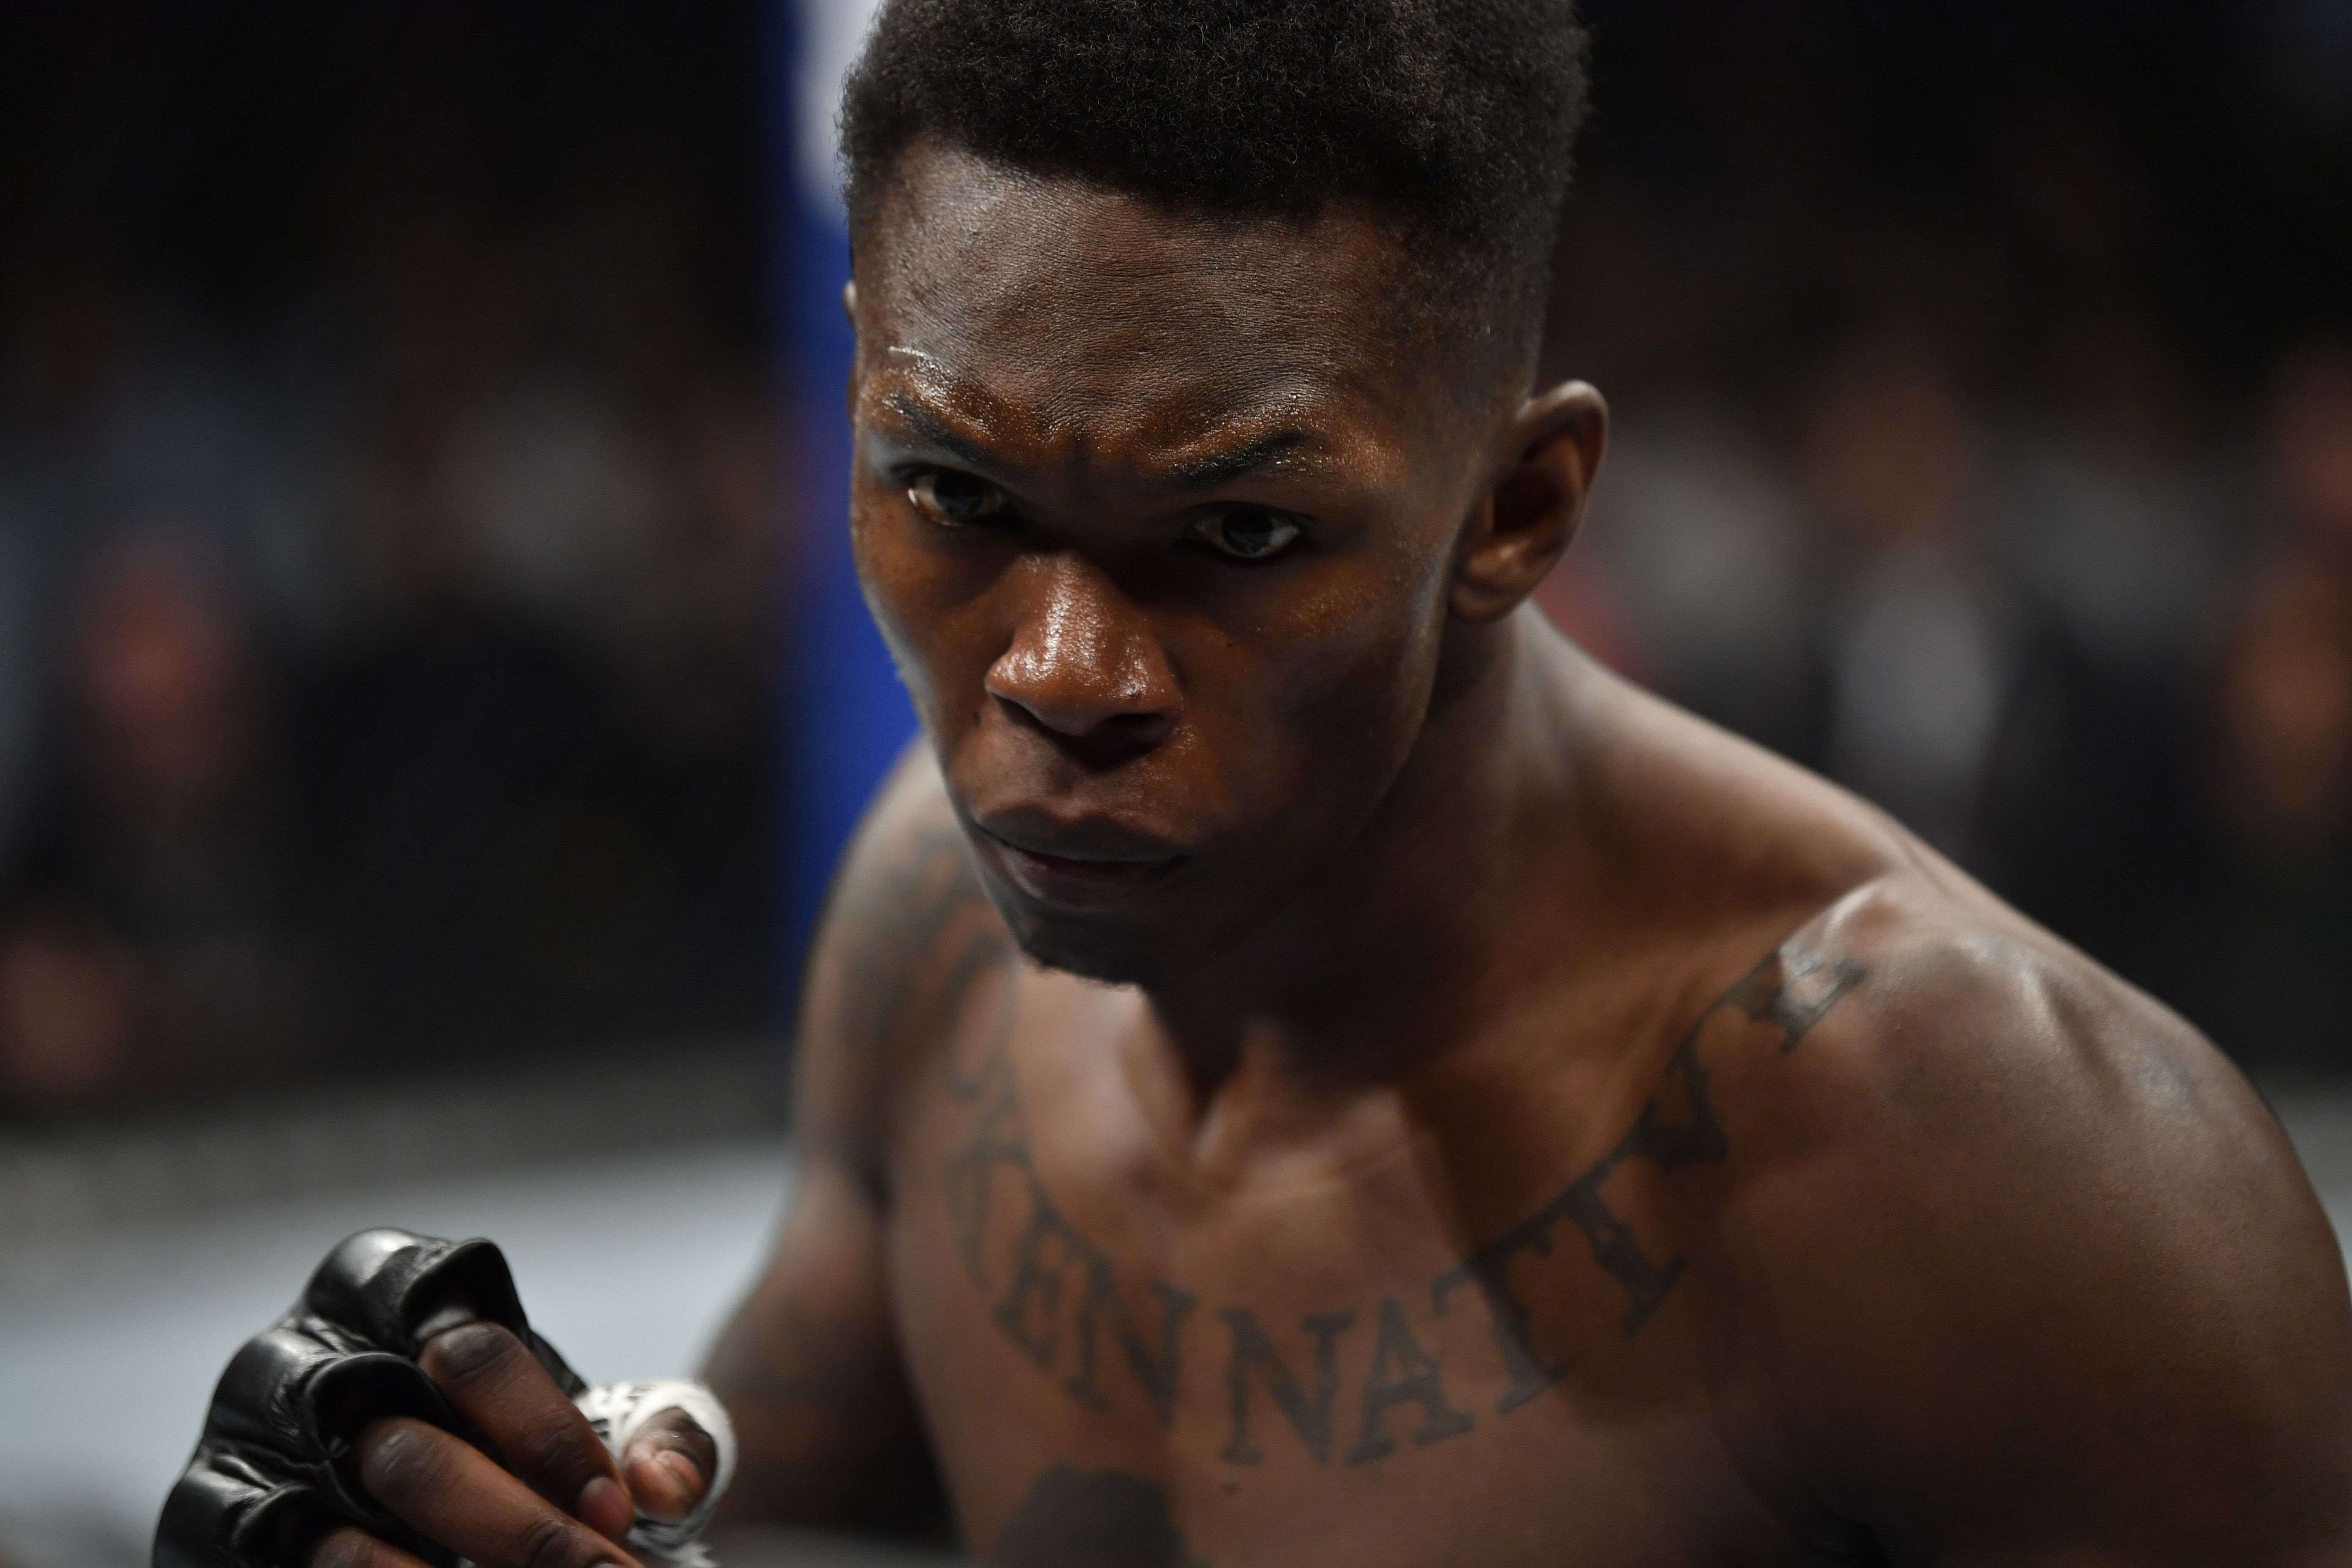 Israel Adesanya Bet His Whole Life on a Future UFC Career: It Was ‘Completely Unlikely’